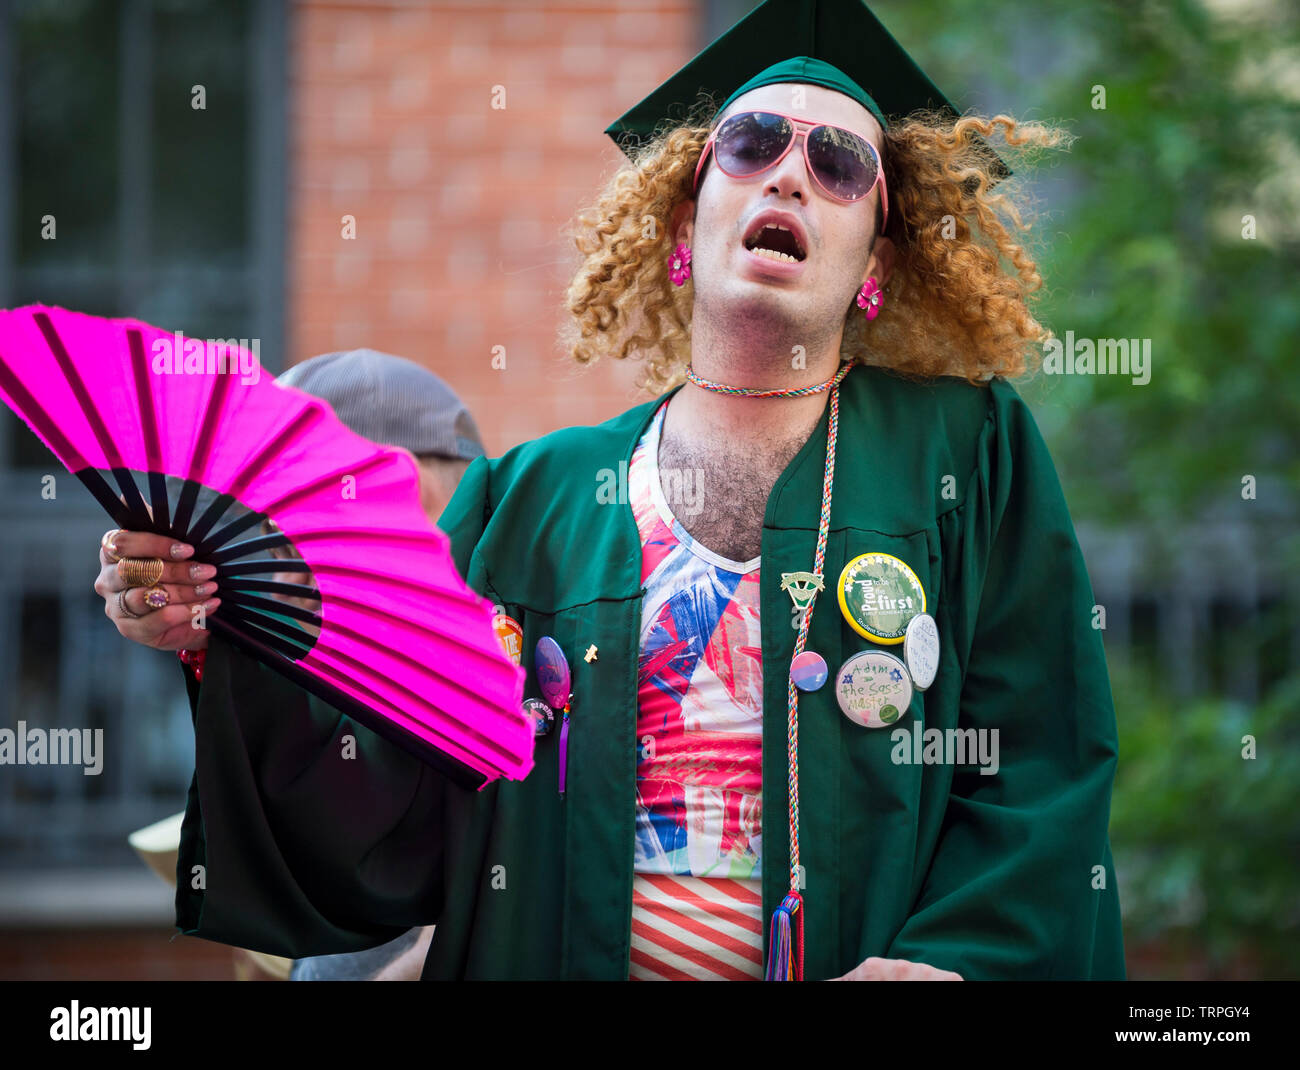 NEW YORK CITY - JUNE 25, 2017: A man celebrates in flamboyant costume at the annual gay pride parade in Greenwich Village. Stock Photo